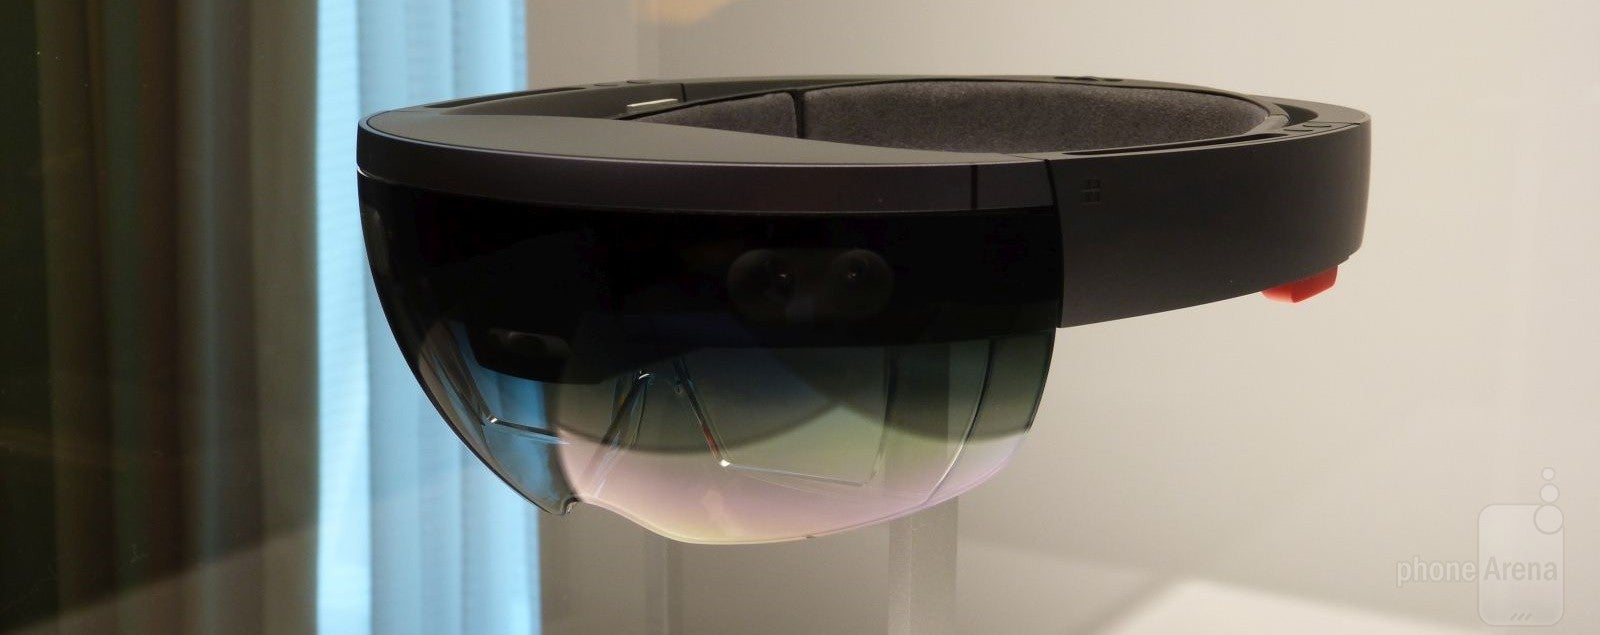 We used Microsoft HoloLens and it is awesome!